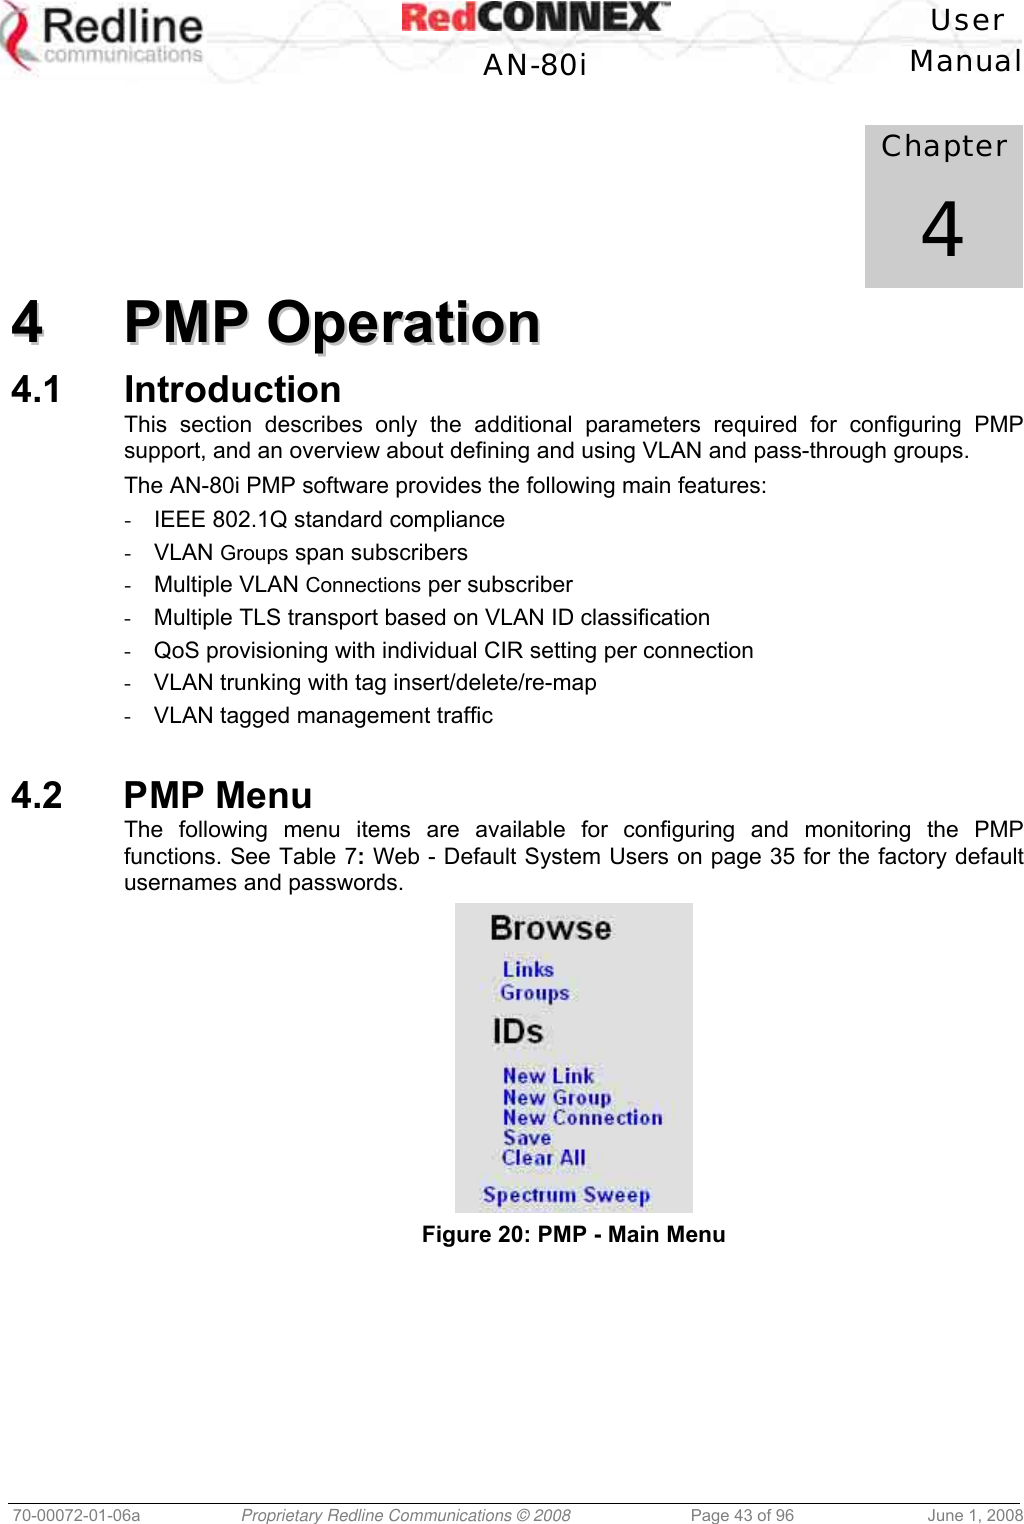   User  AN-80i Manual  70-00072-01-06a  Proprietary Redline Communications © 2008  Page 43 of 96  June 1, 2008             Chapter 4 44  PPMMPP  OOppeerraattiioonn  4.1 Introduction This section describes only the additional parameters required for configuring PMP support, and an overview about defining and using VLAN and pass-through groups. The AN-80i PMP software provides the following main features: -  IEEE 802.1Q standard compliance -  VLAN Groups span subscribers -  Multiple VLAN Connections per subscriber -  Multiple TLS transport based on VLAN ID classification  -  QoS provisioning with individual CIR setting per connection -  VLAN trunking with tag insert/delete/re-map -  VLAN tagged management traffic   4.2 PMP Menu The following menu items are available for configuring and monitoring the PMP functions. See Table 7: Web - Default System Users on page 35 for the factory default usernames and passwords.  Figure 20: PMP - Main Menu 